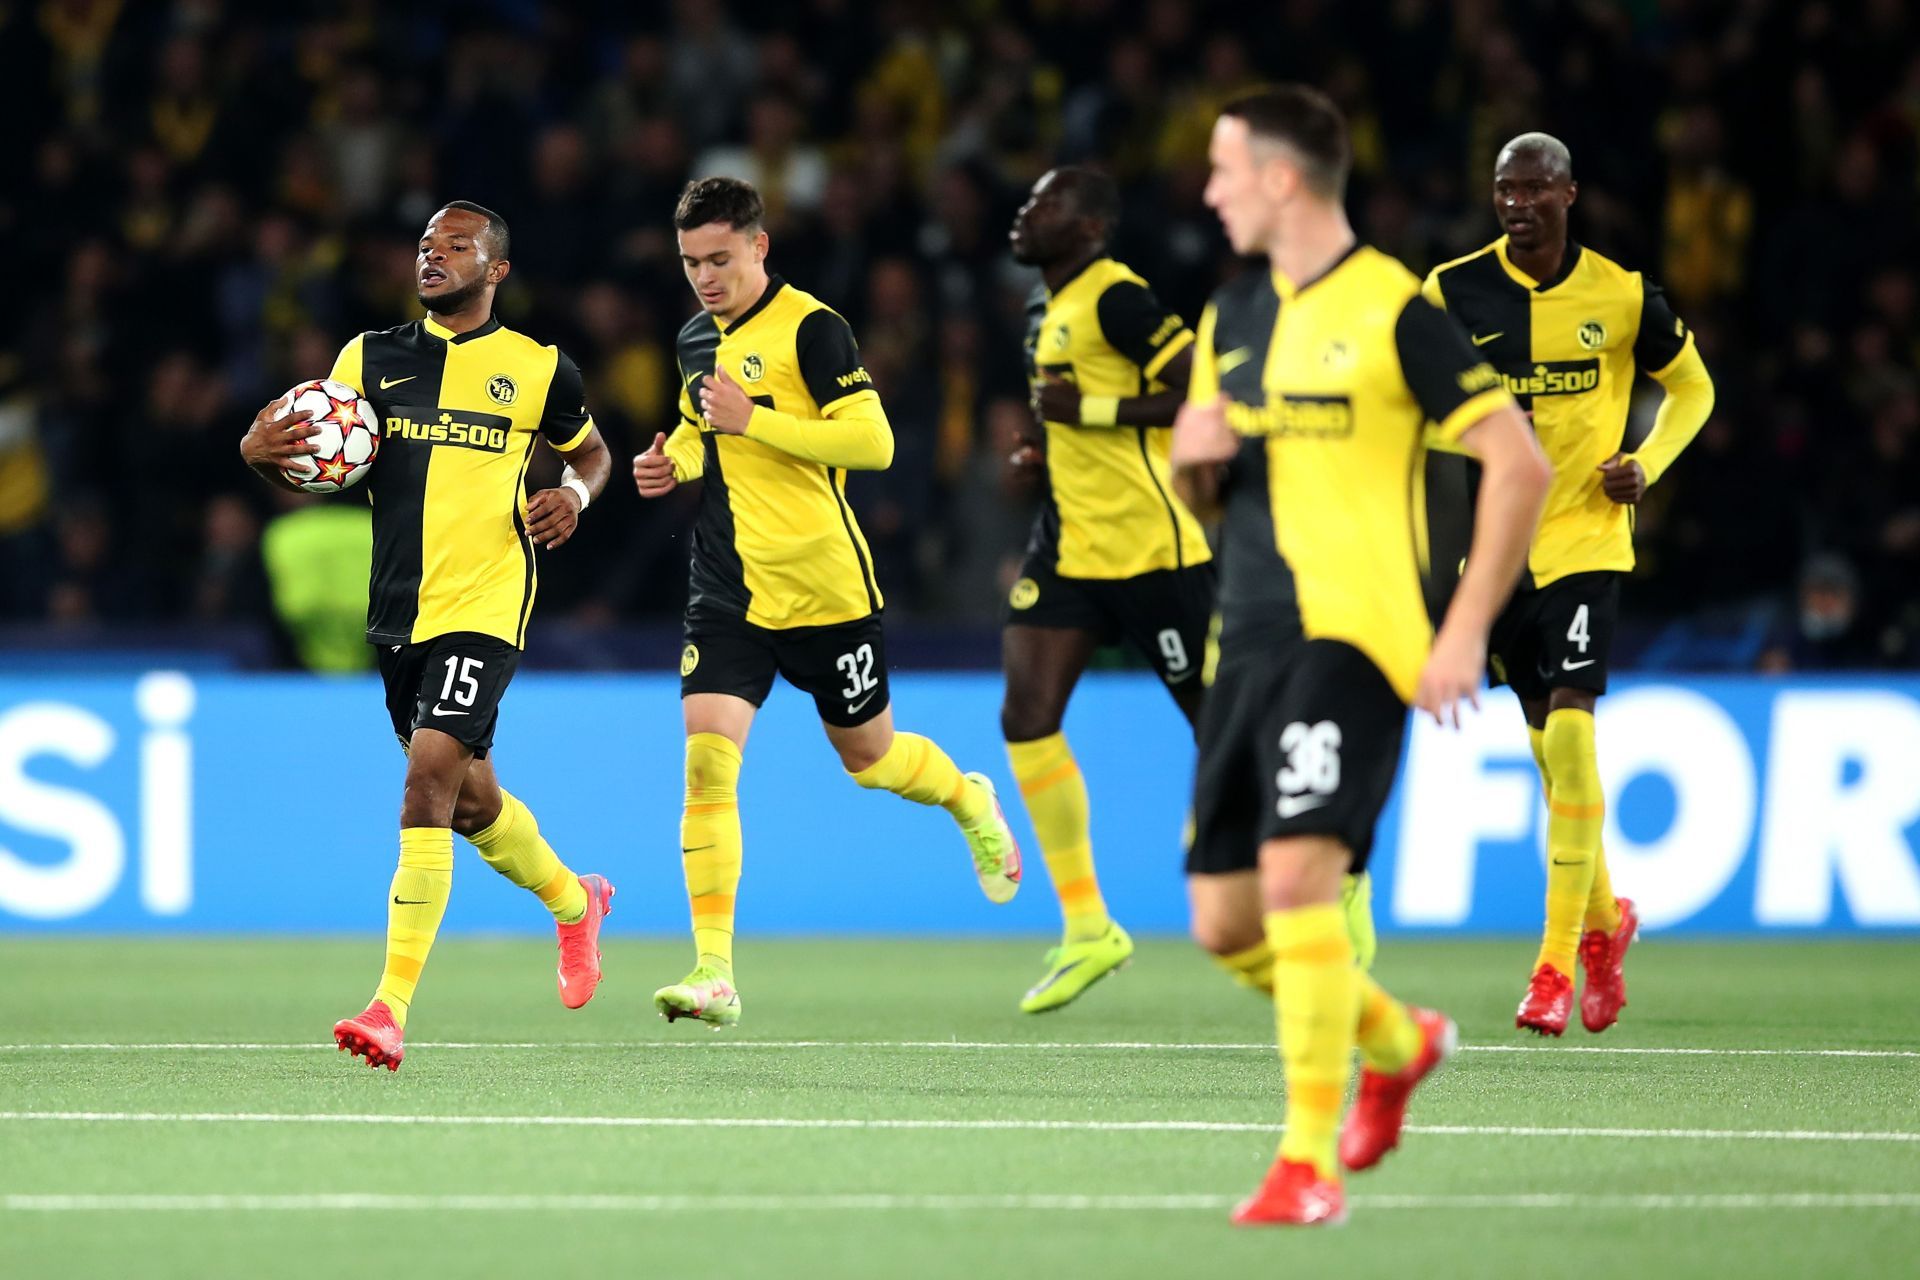 BSC Young Boys will host Lausanne Sport on Saturday